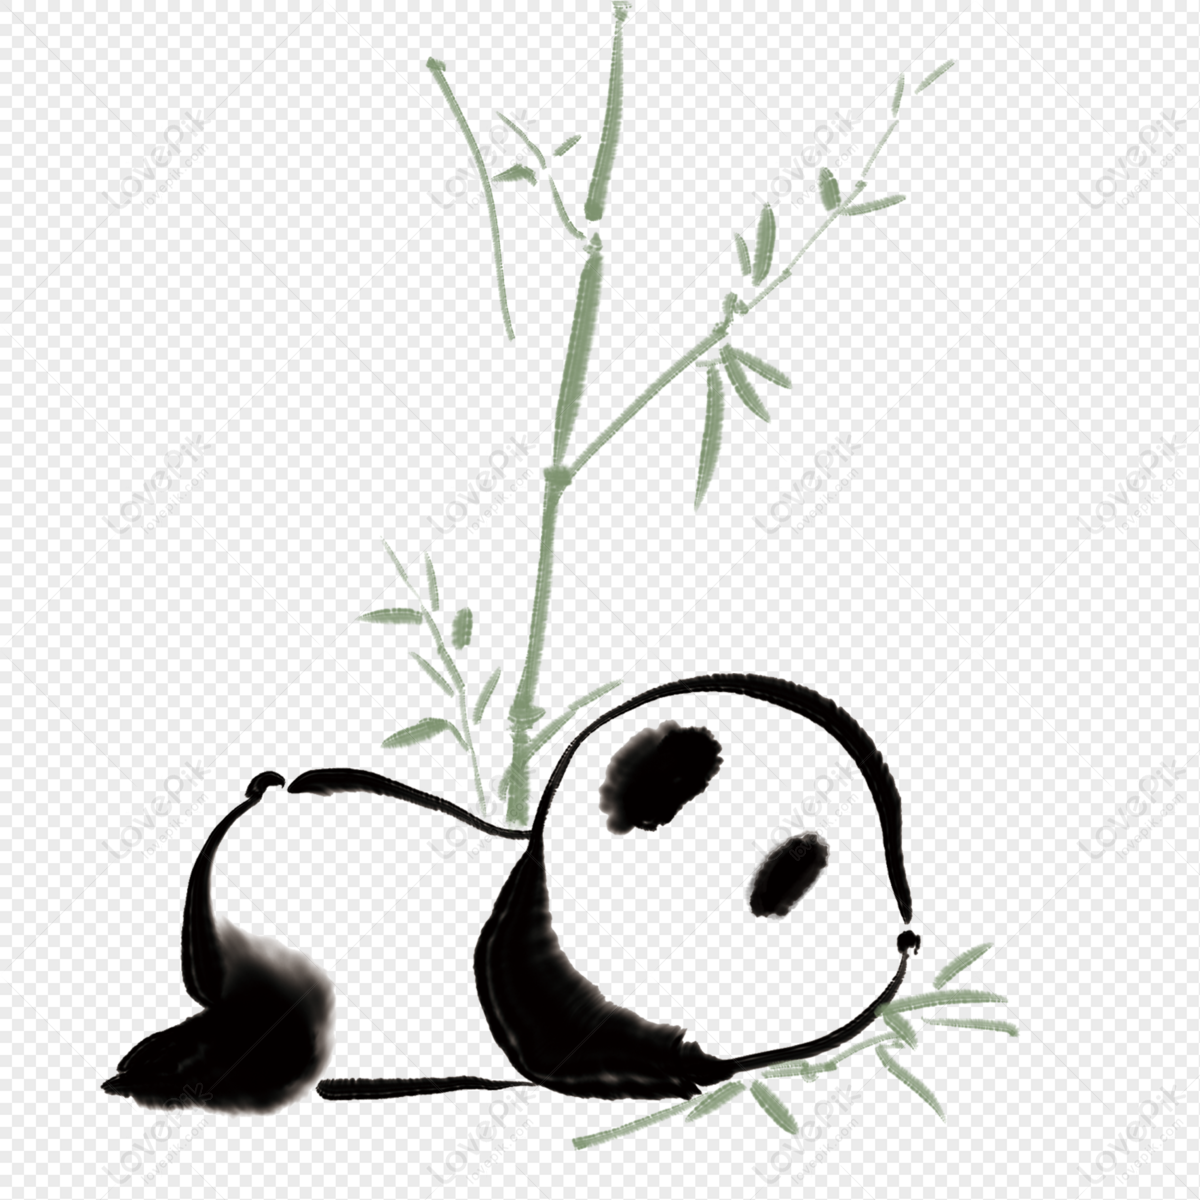 Panda PNG Transparent Image And Clipart Image For Free Download ...